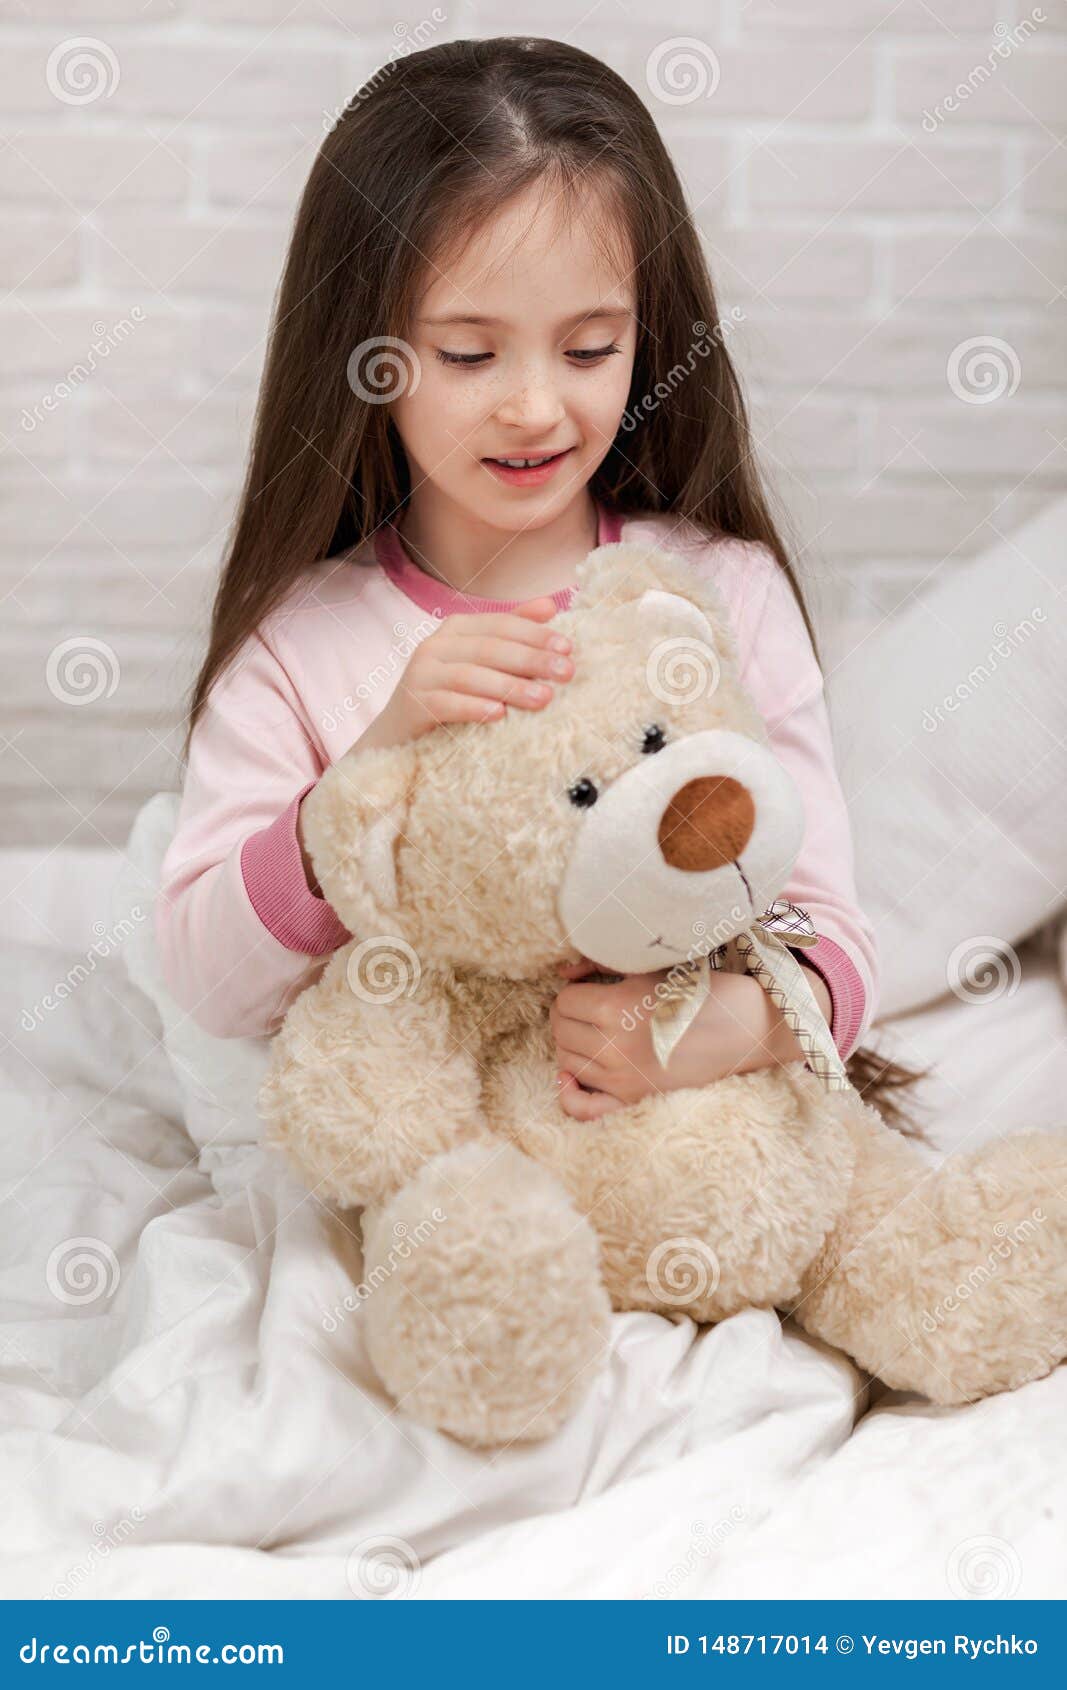 Baby hugging a teddy bear stock photo. Image of bedding - 148717014